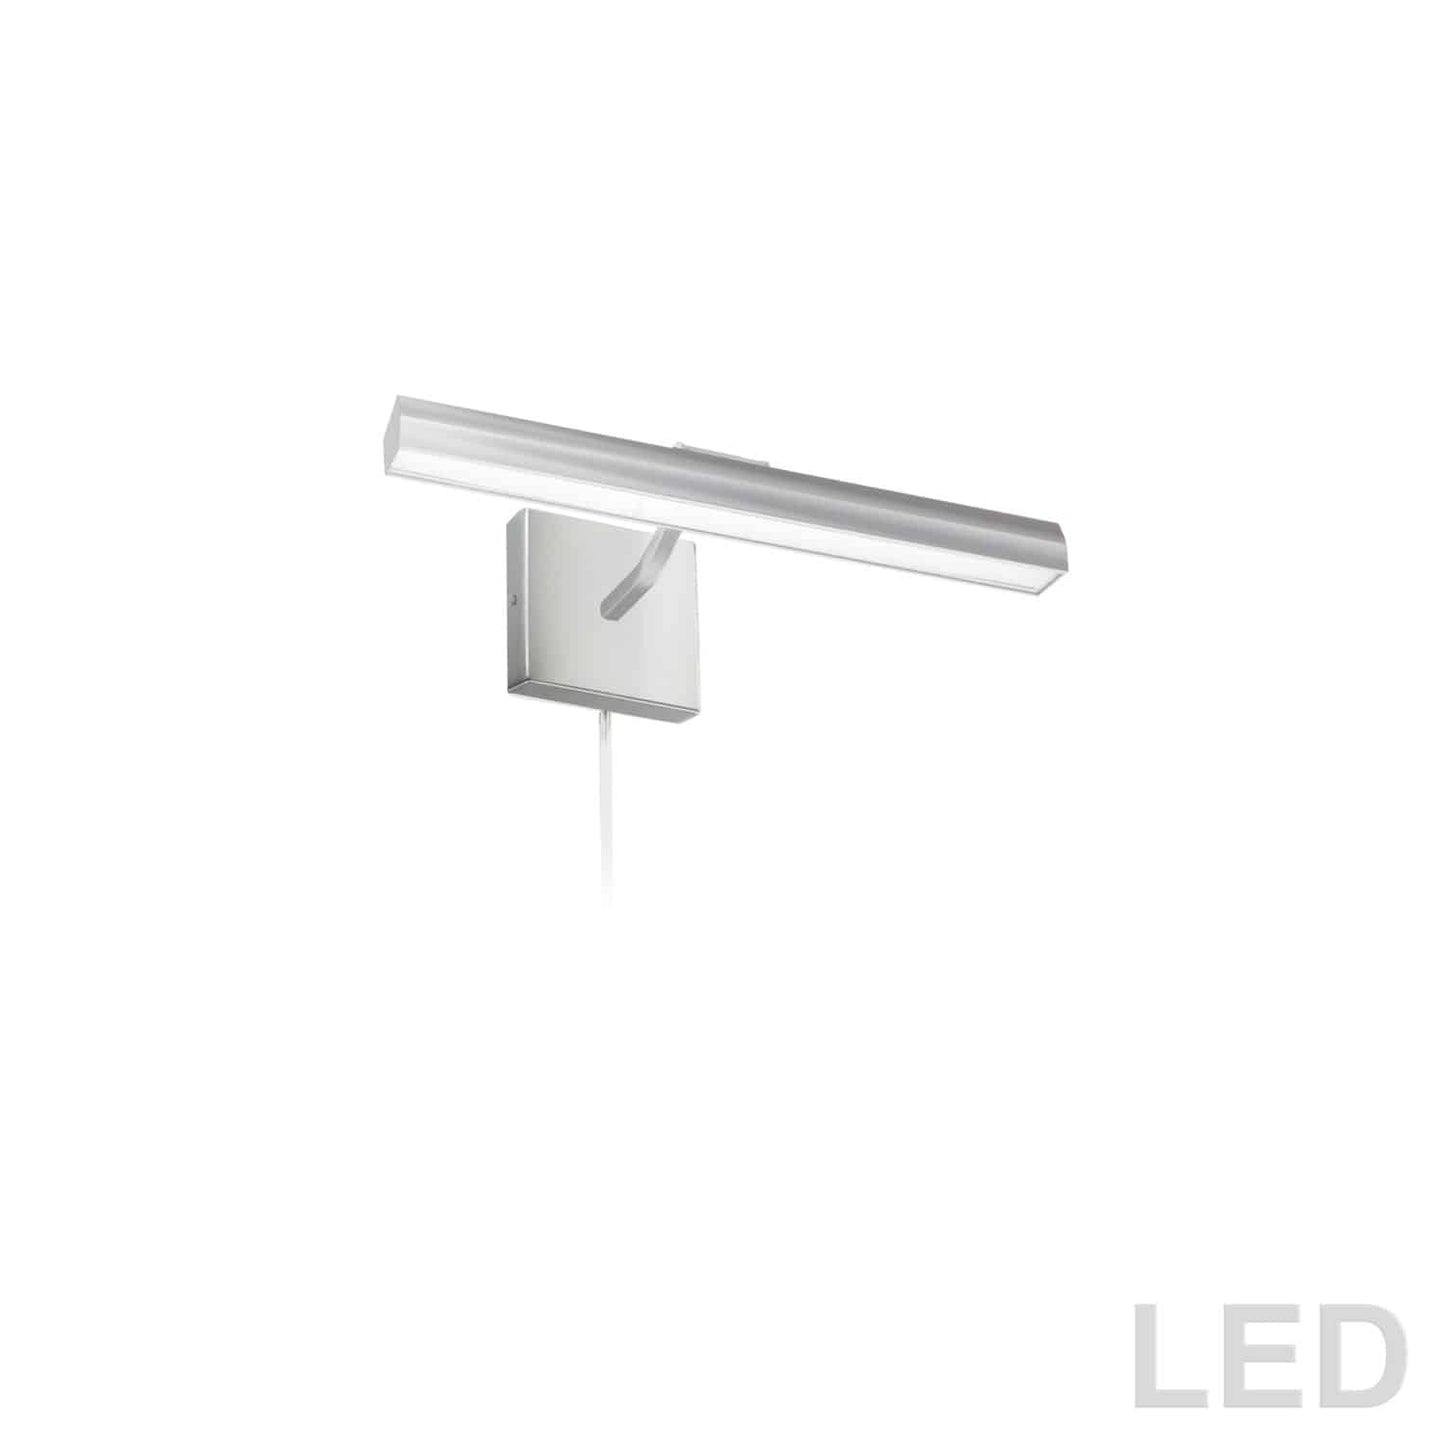 Dainolite PIC222-16LED-SC 20W 16" Picture Light, Satin Chrome with Frosted Glass Diffuser